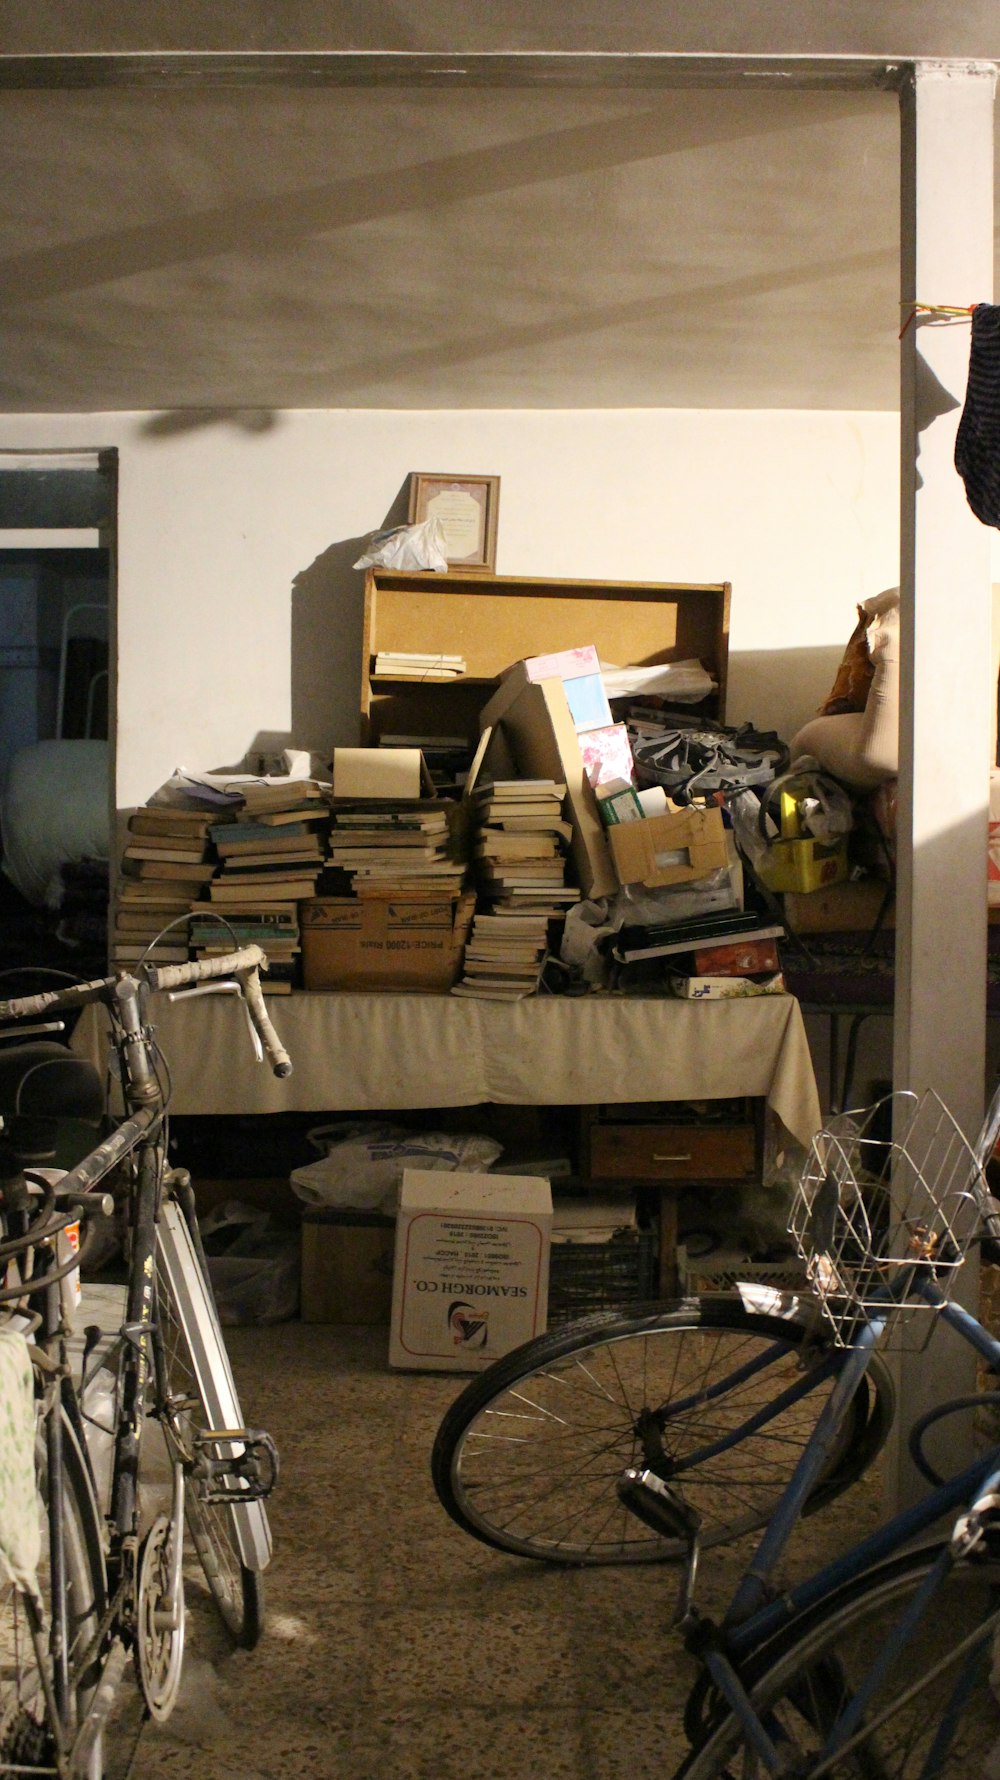 a room filled with lots of clutter and lots of bikes